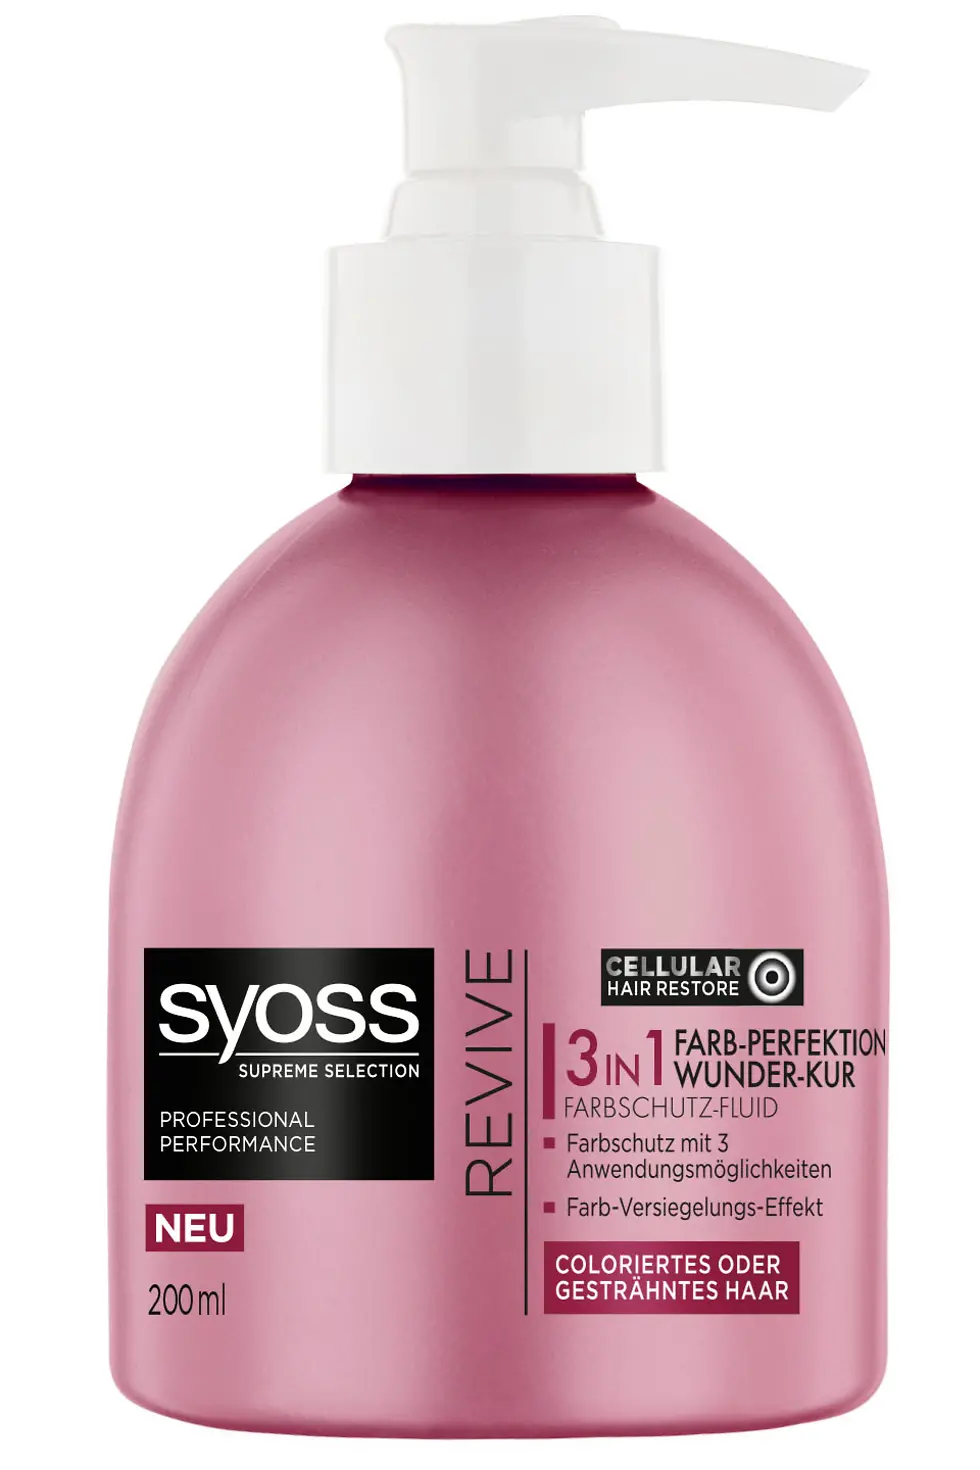 Syoss Revive 3in1 Farb-Perfektion Wunder-Kur